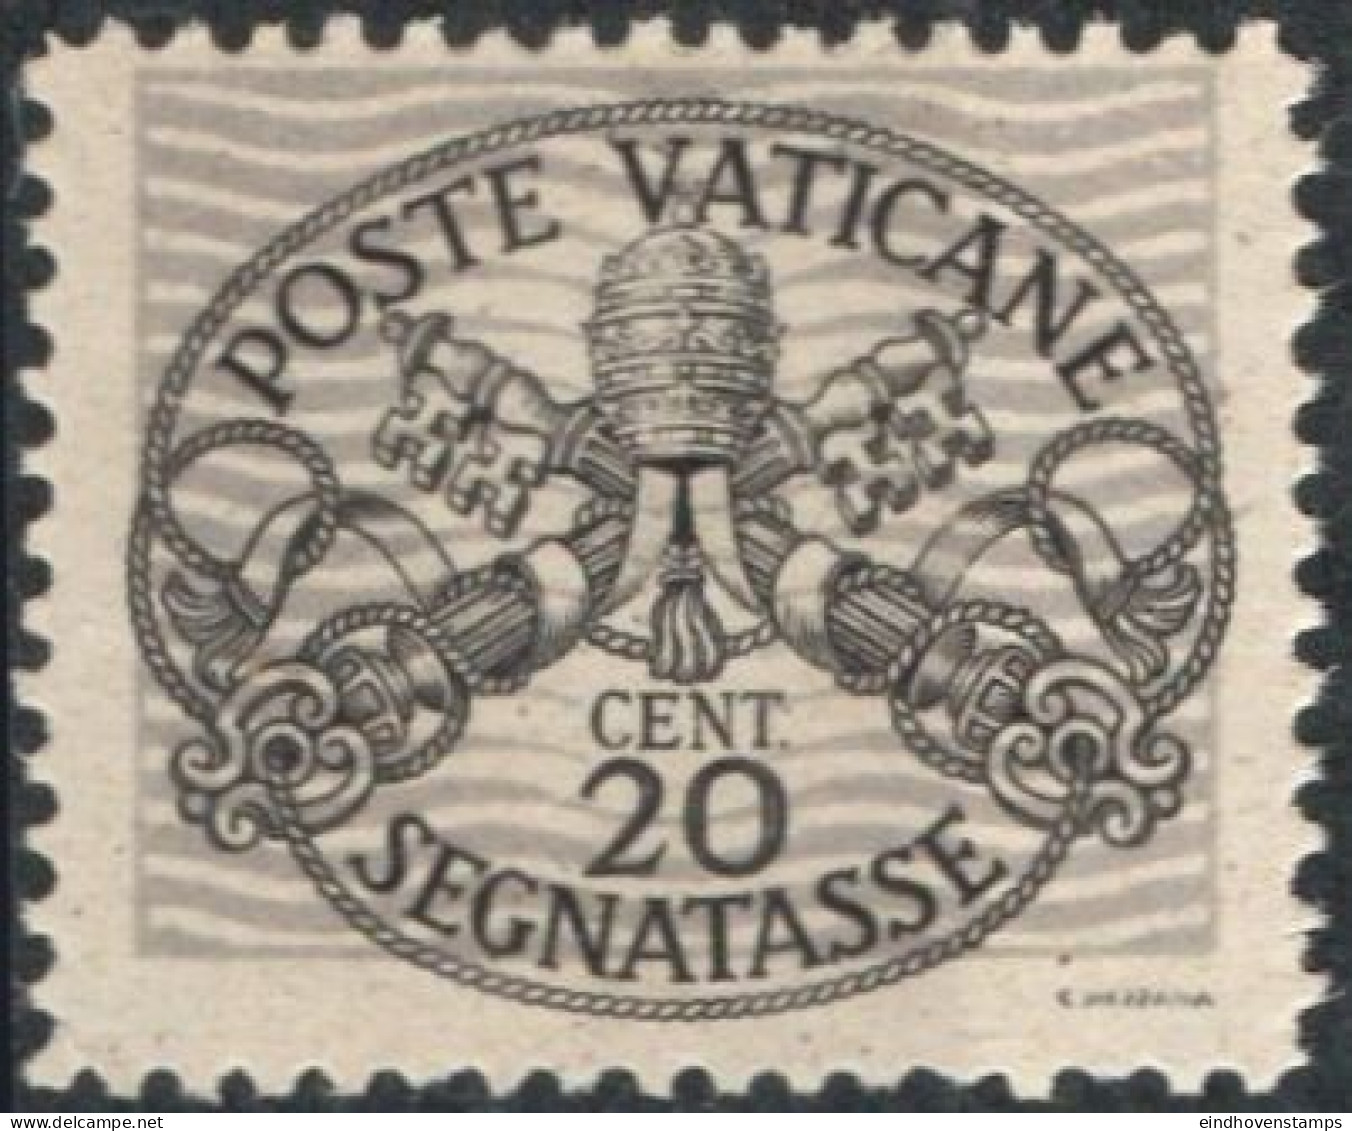 Vatican 1945, Postage Due 20c With Wide Grey Lines 1 Value Mi P8-xII  MNH - Segnatasse